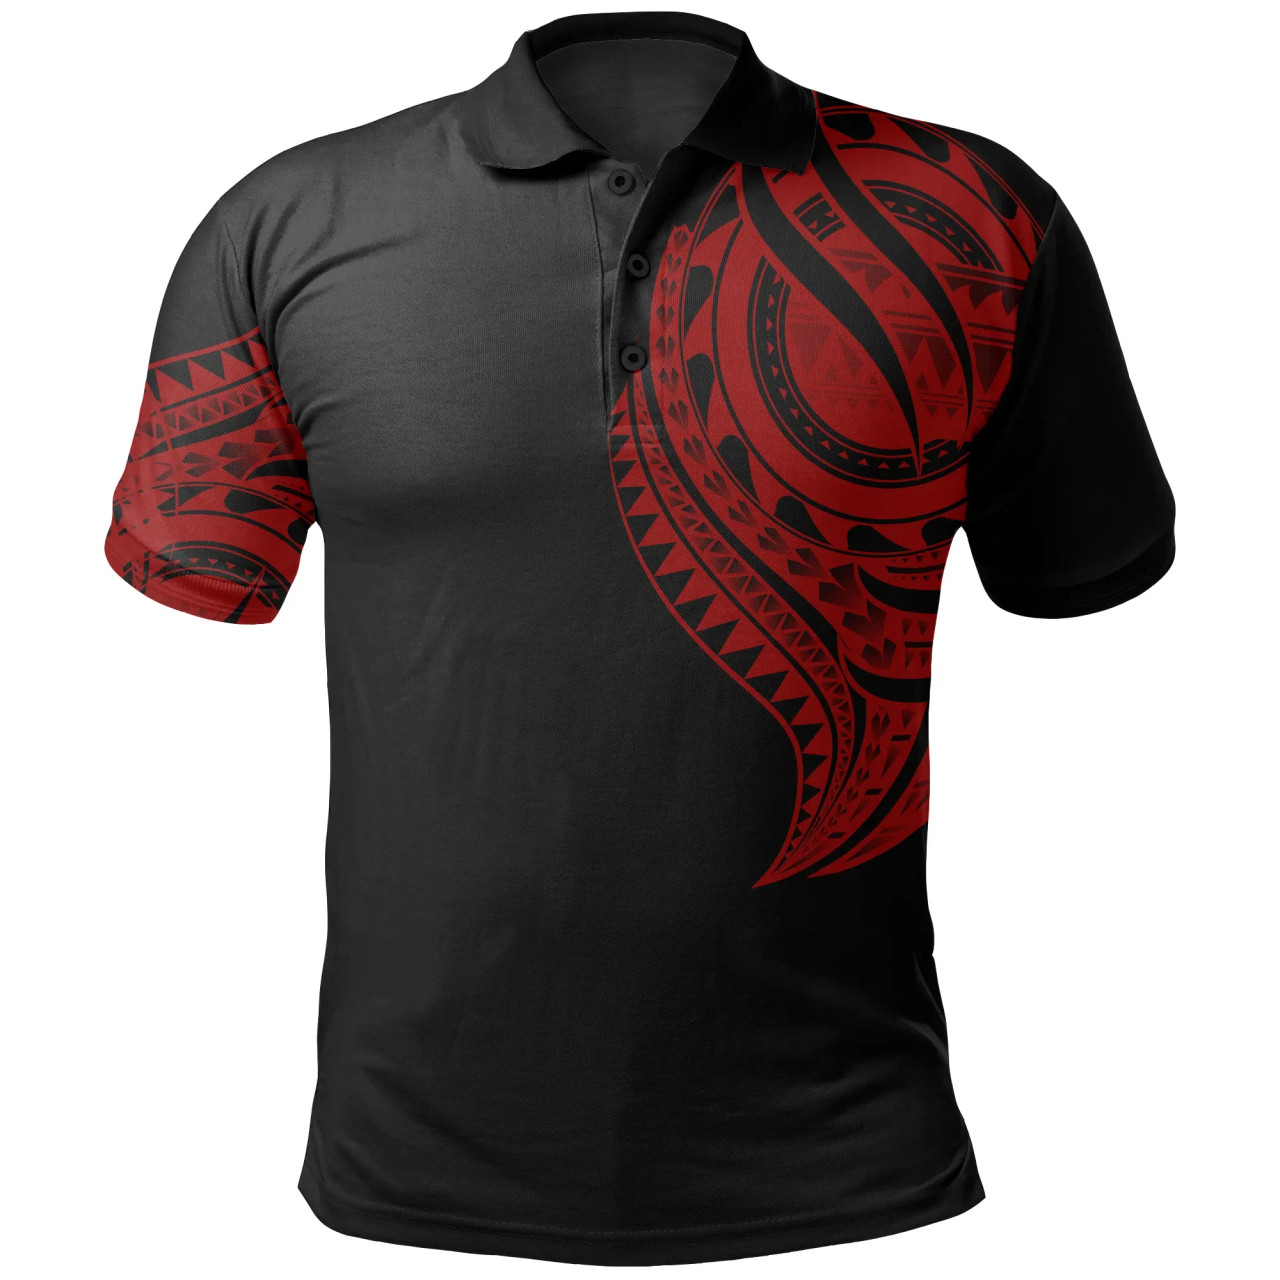 Cook Islands Polo Shirt - Cook Islands Tatau Red Patterns With Coat Of Arms 1